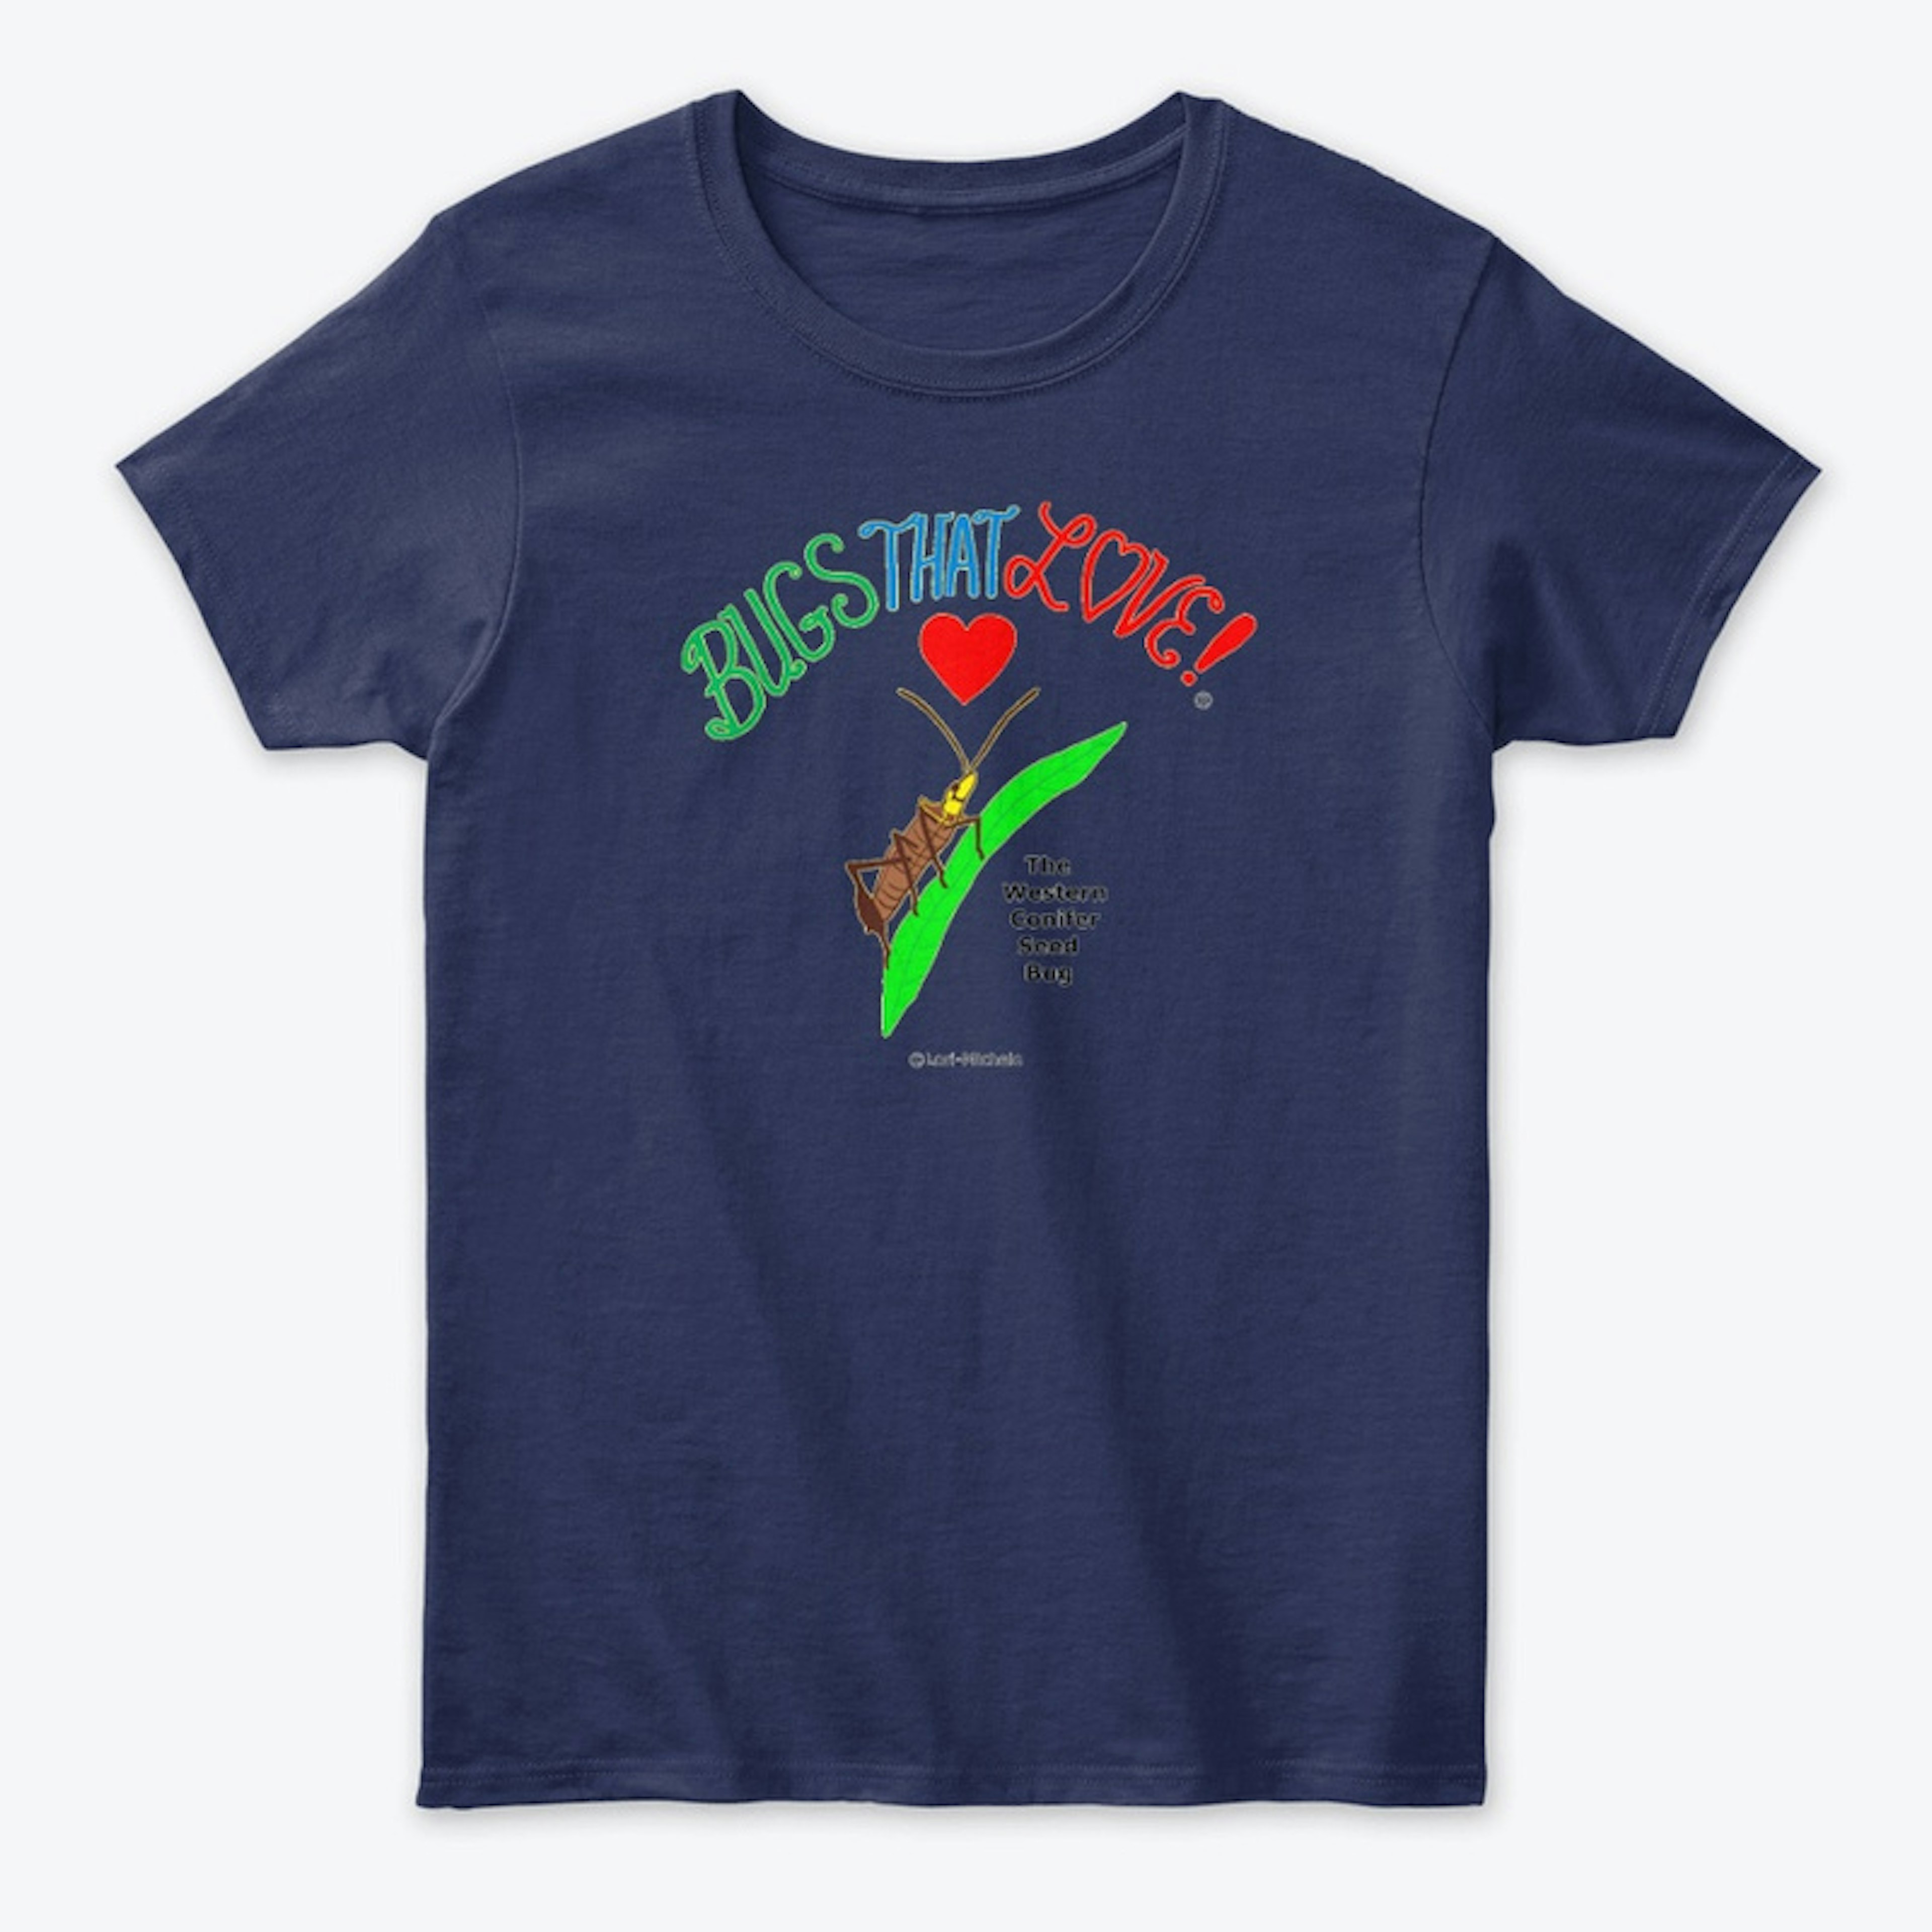 BUGS THAT LOVE! New design